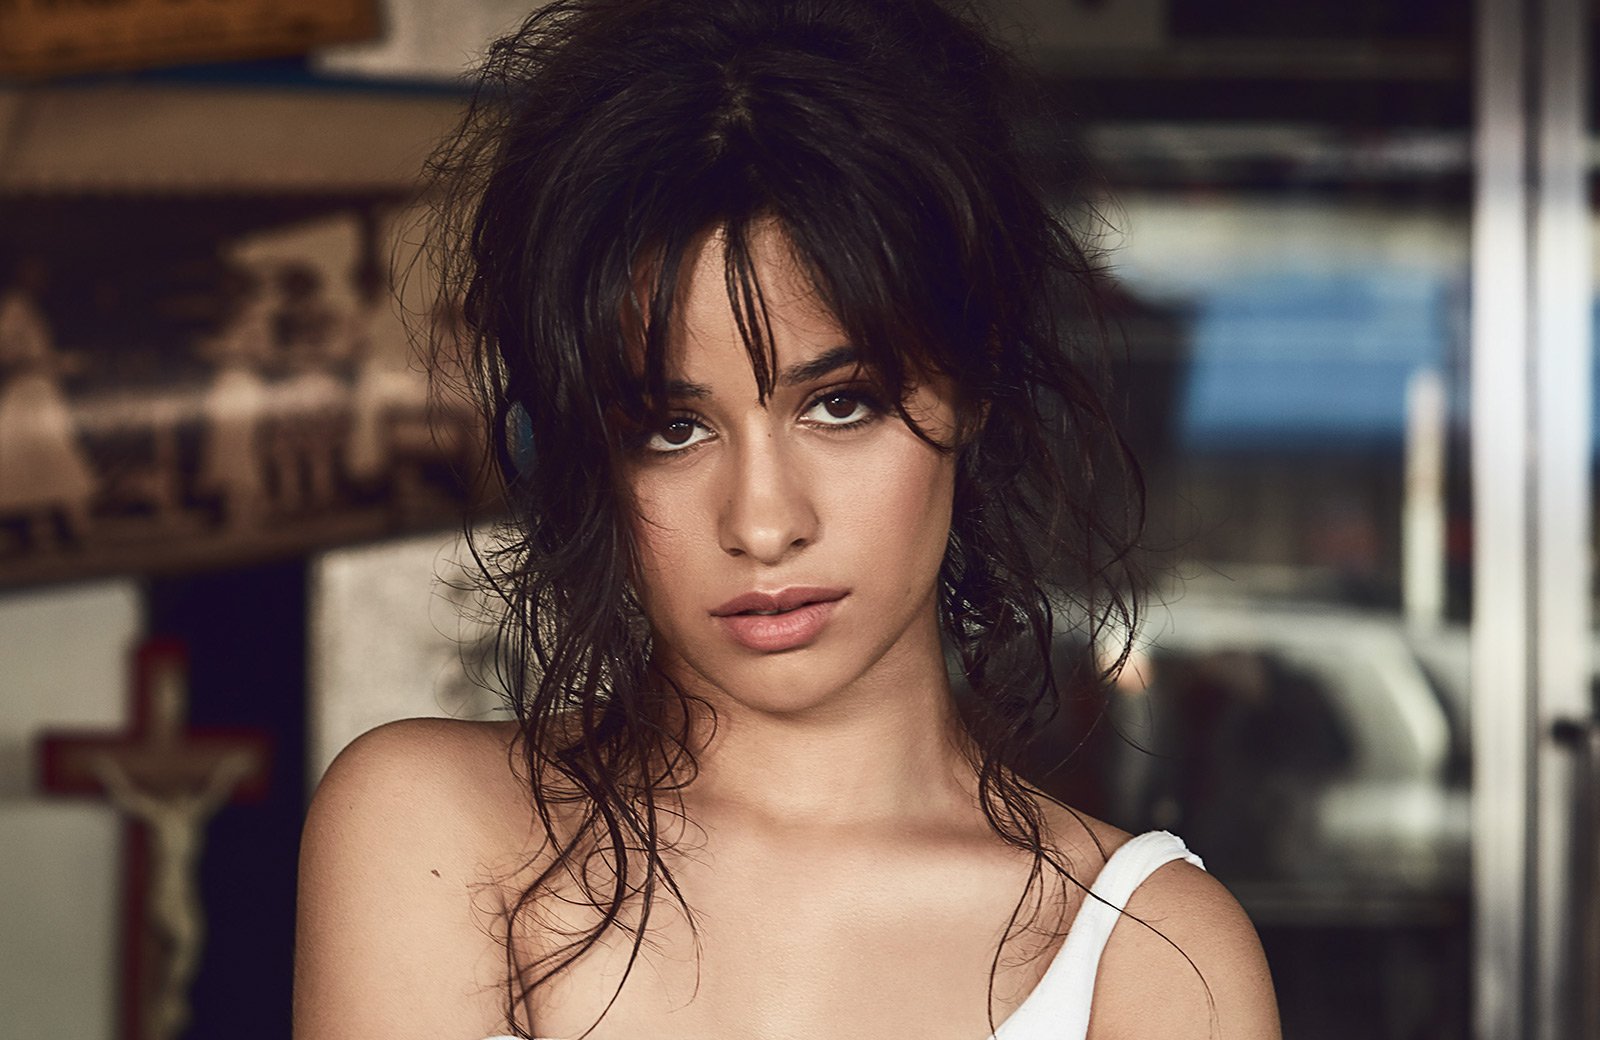 Camila Cabello to release self-titled debut album | Sony Music UK – News1600 x 1040